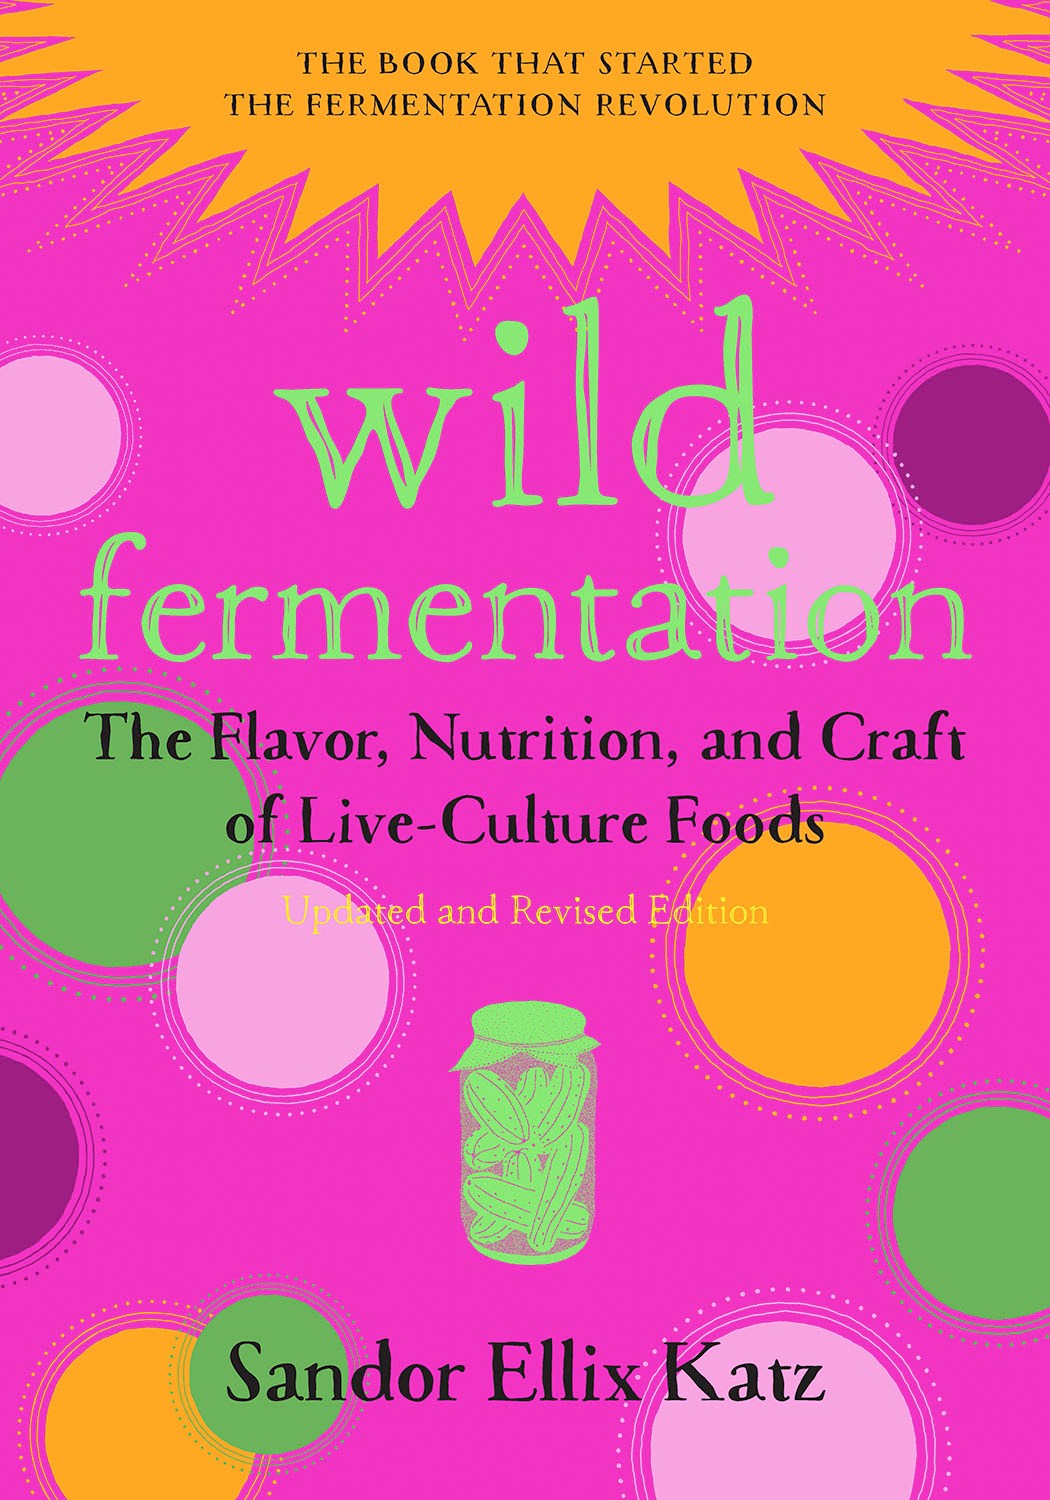 Wild Fermentation: The Flavor, Nutrition, and Craft of Live-Culture Foods, 2nd Edition (2nd Edition, Revised)